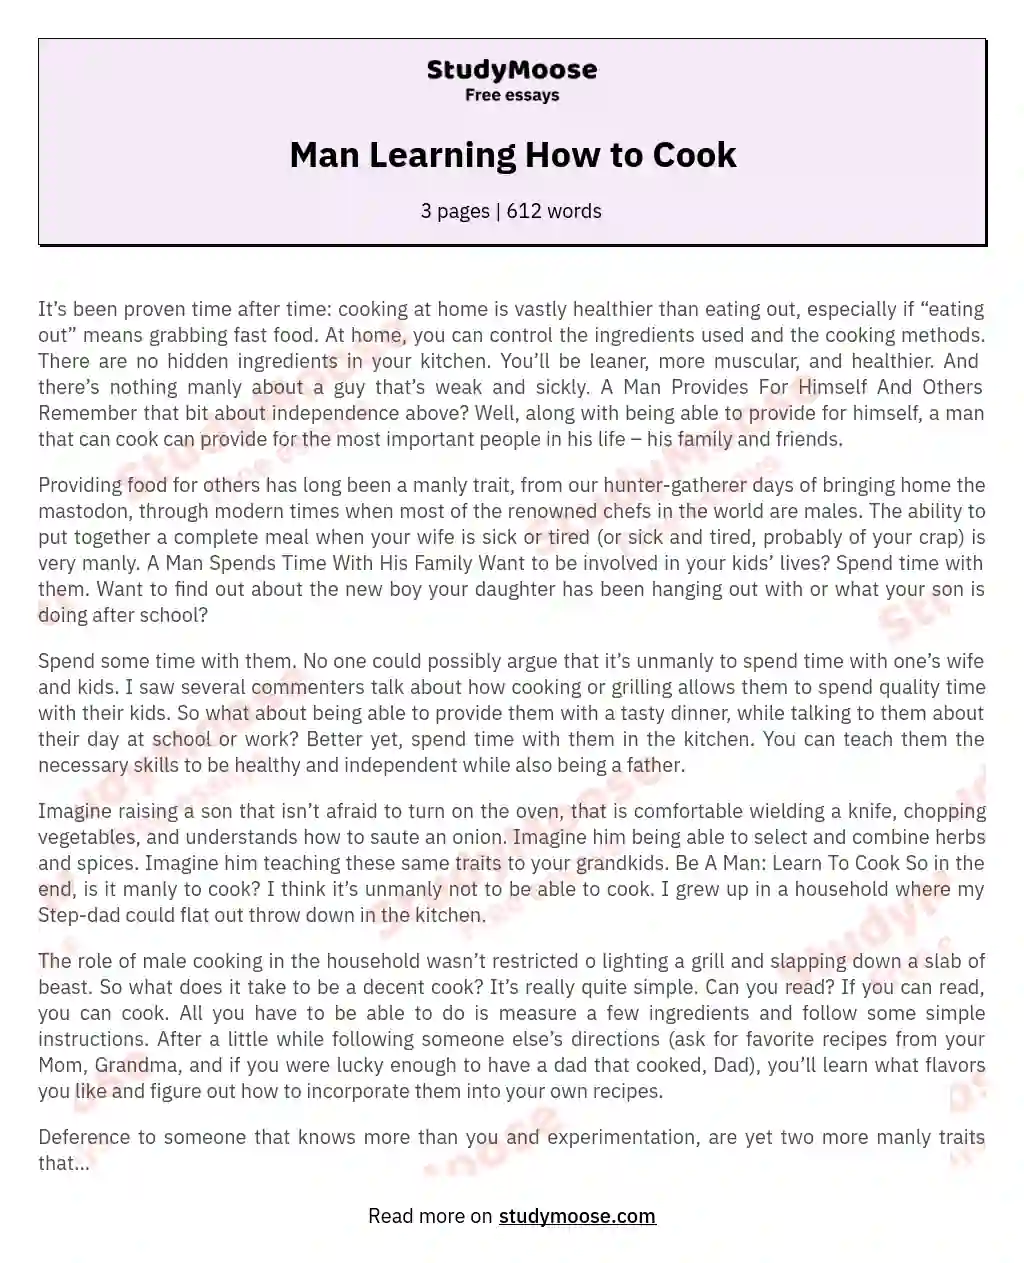 Man Learning How to Cook